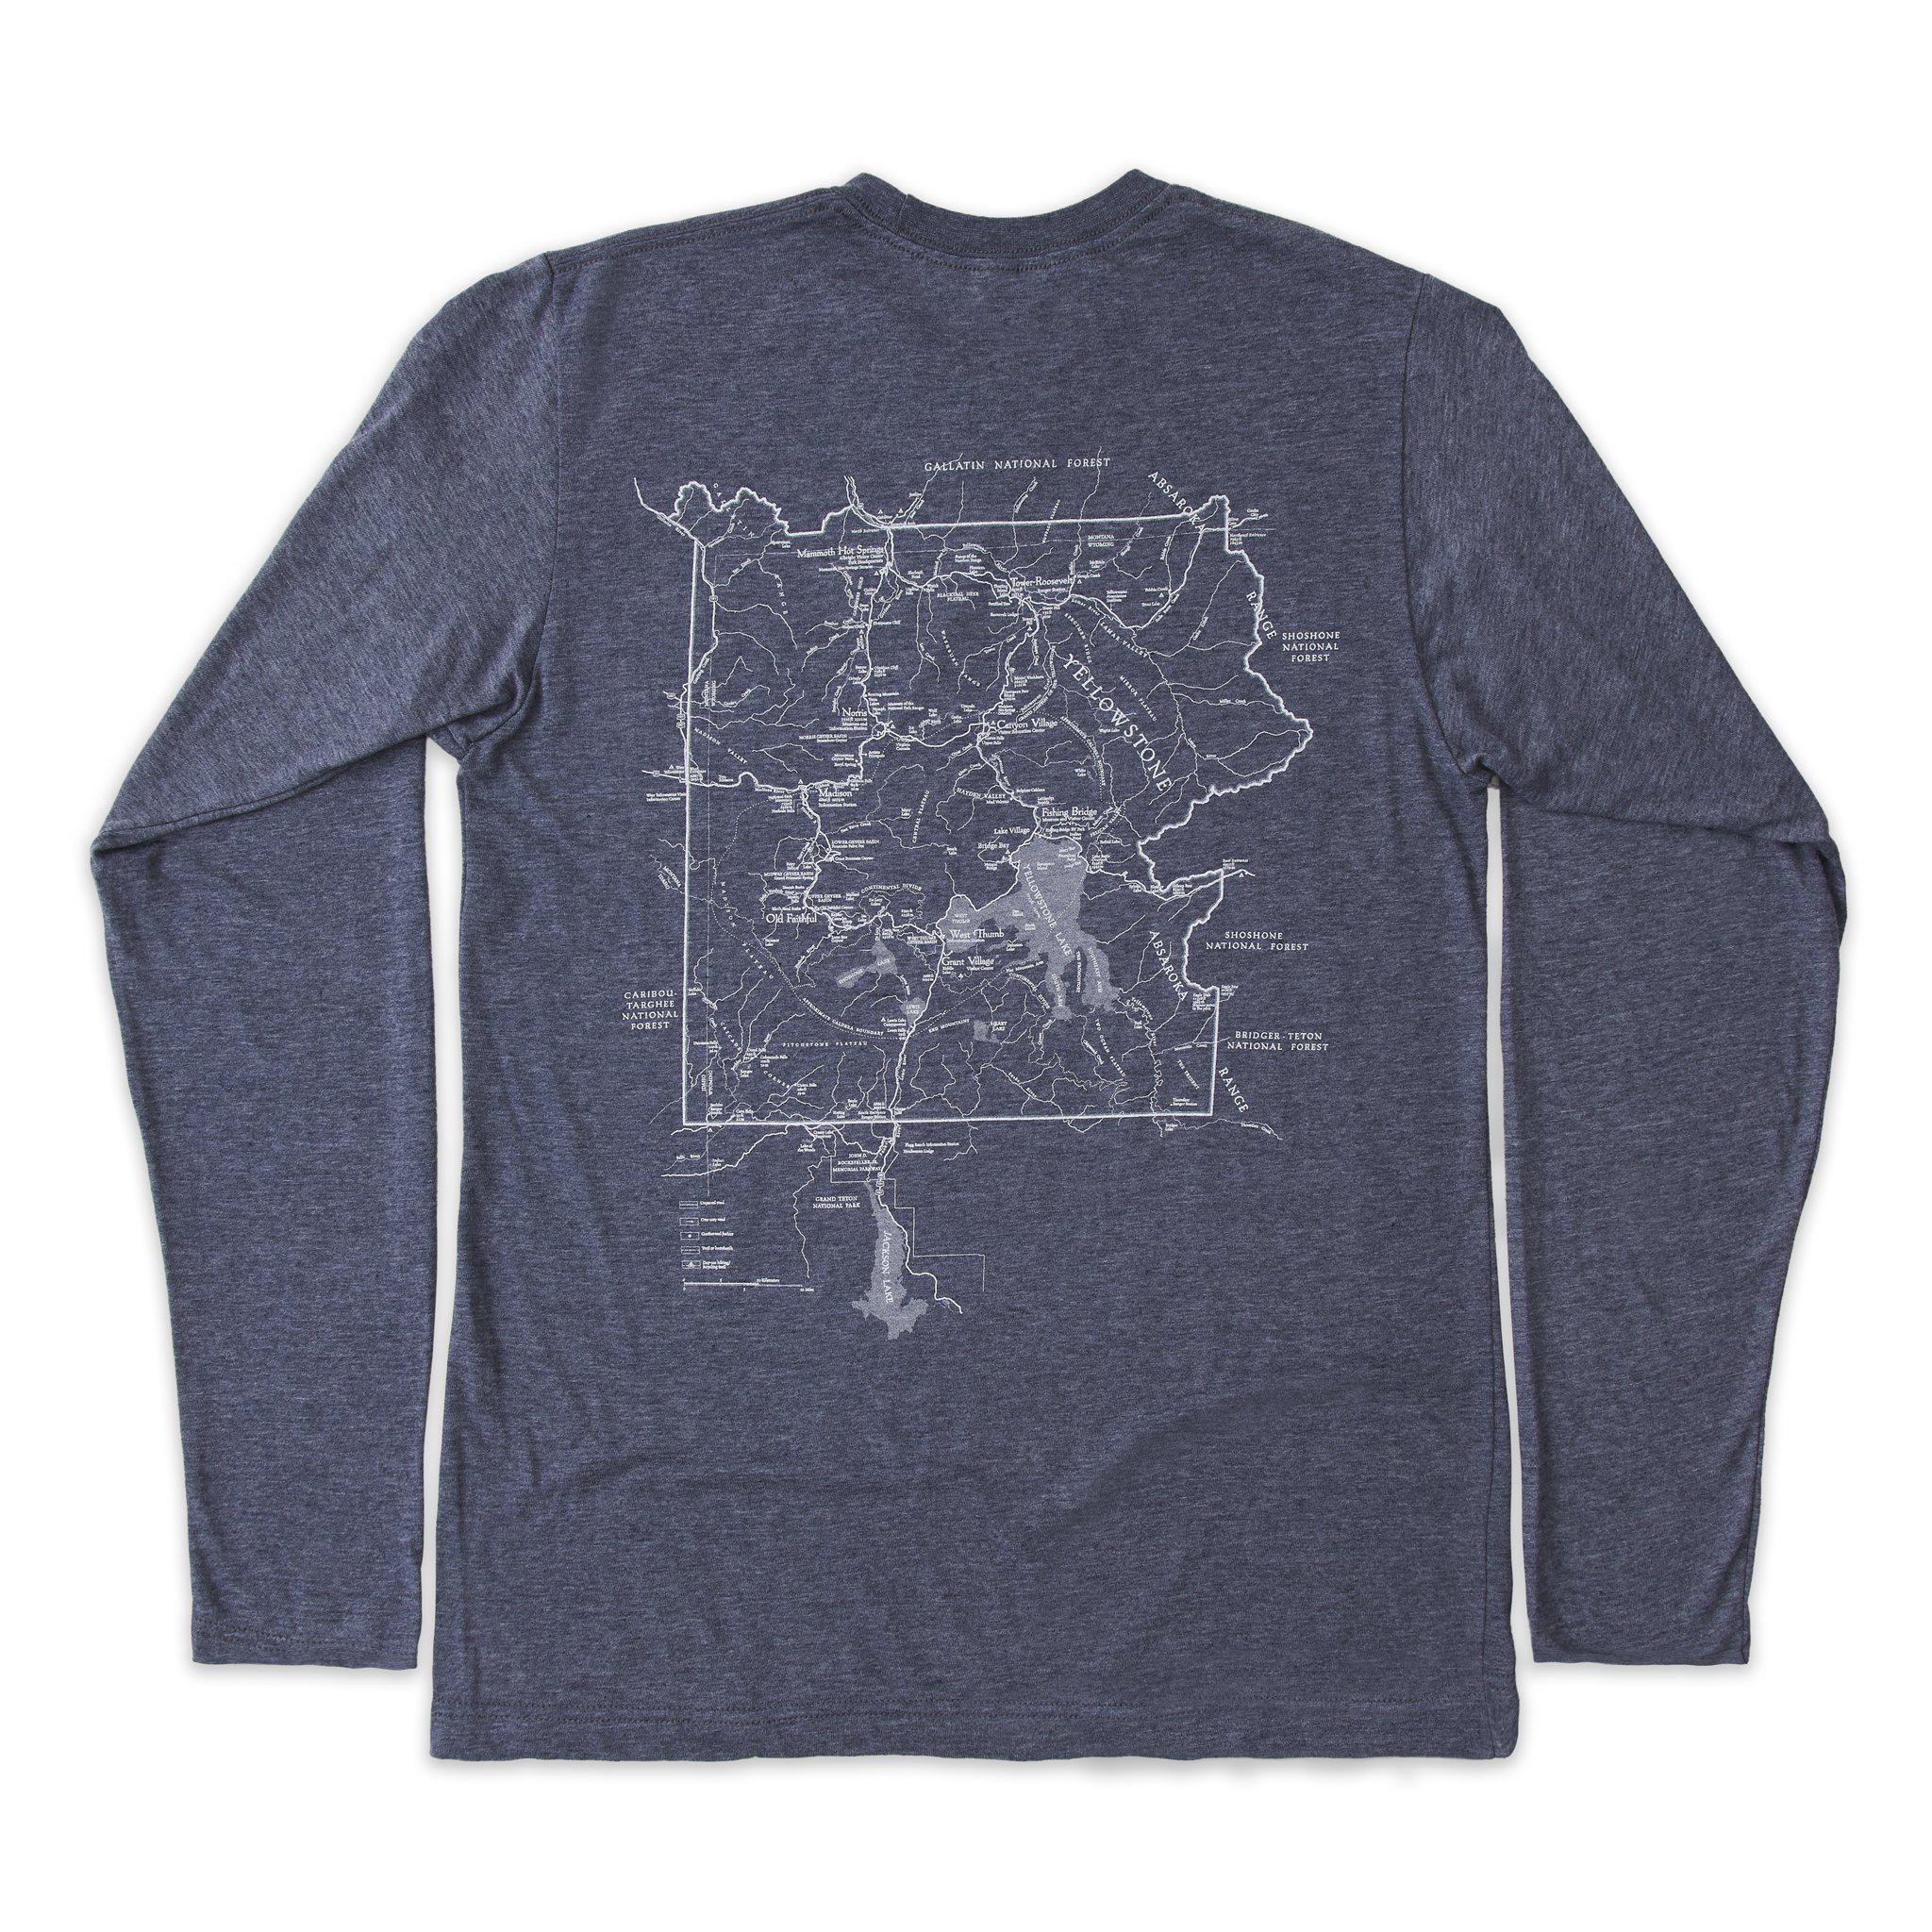 NY State Parks Maple Leaf - Storm Grey - Long Sleeve Tees (Park